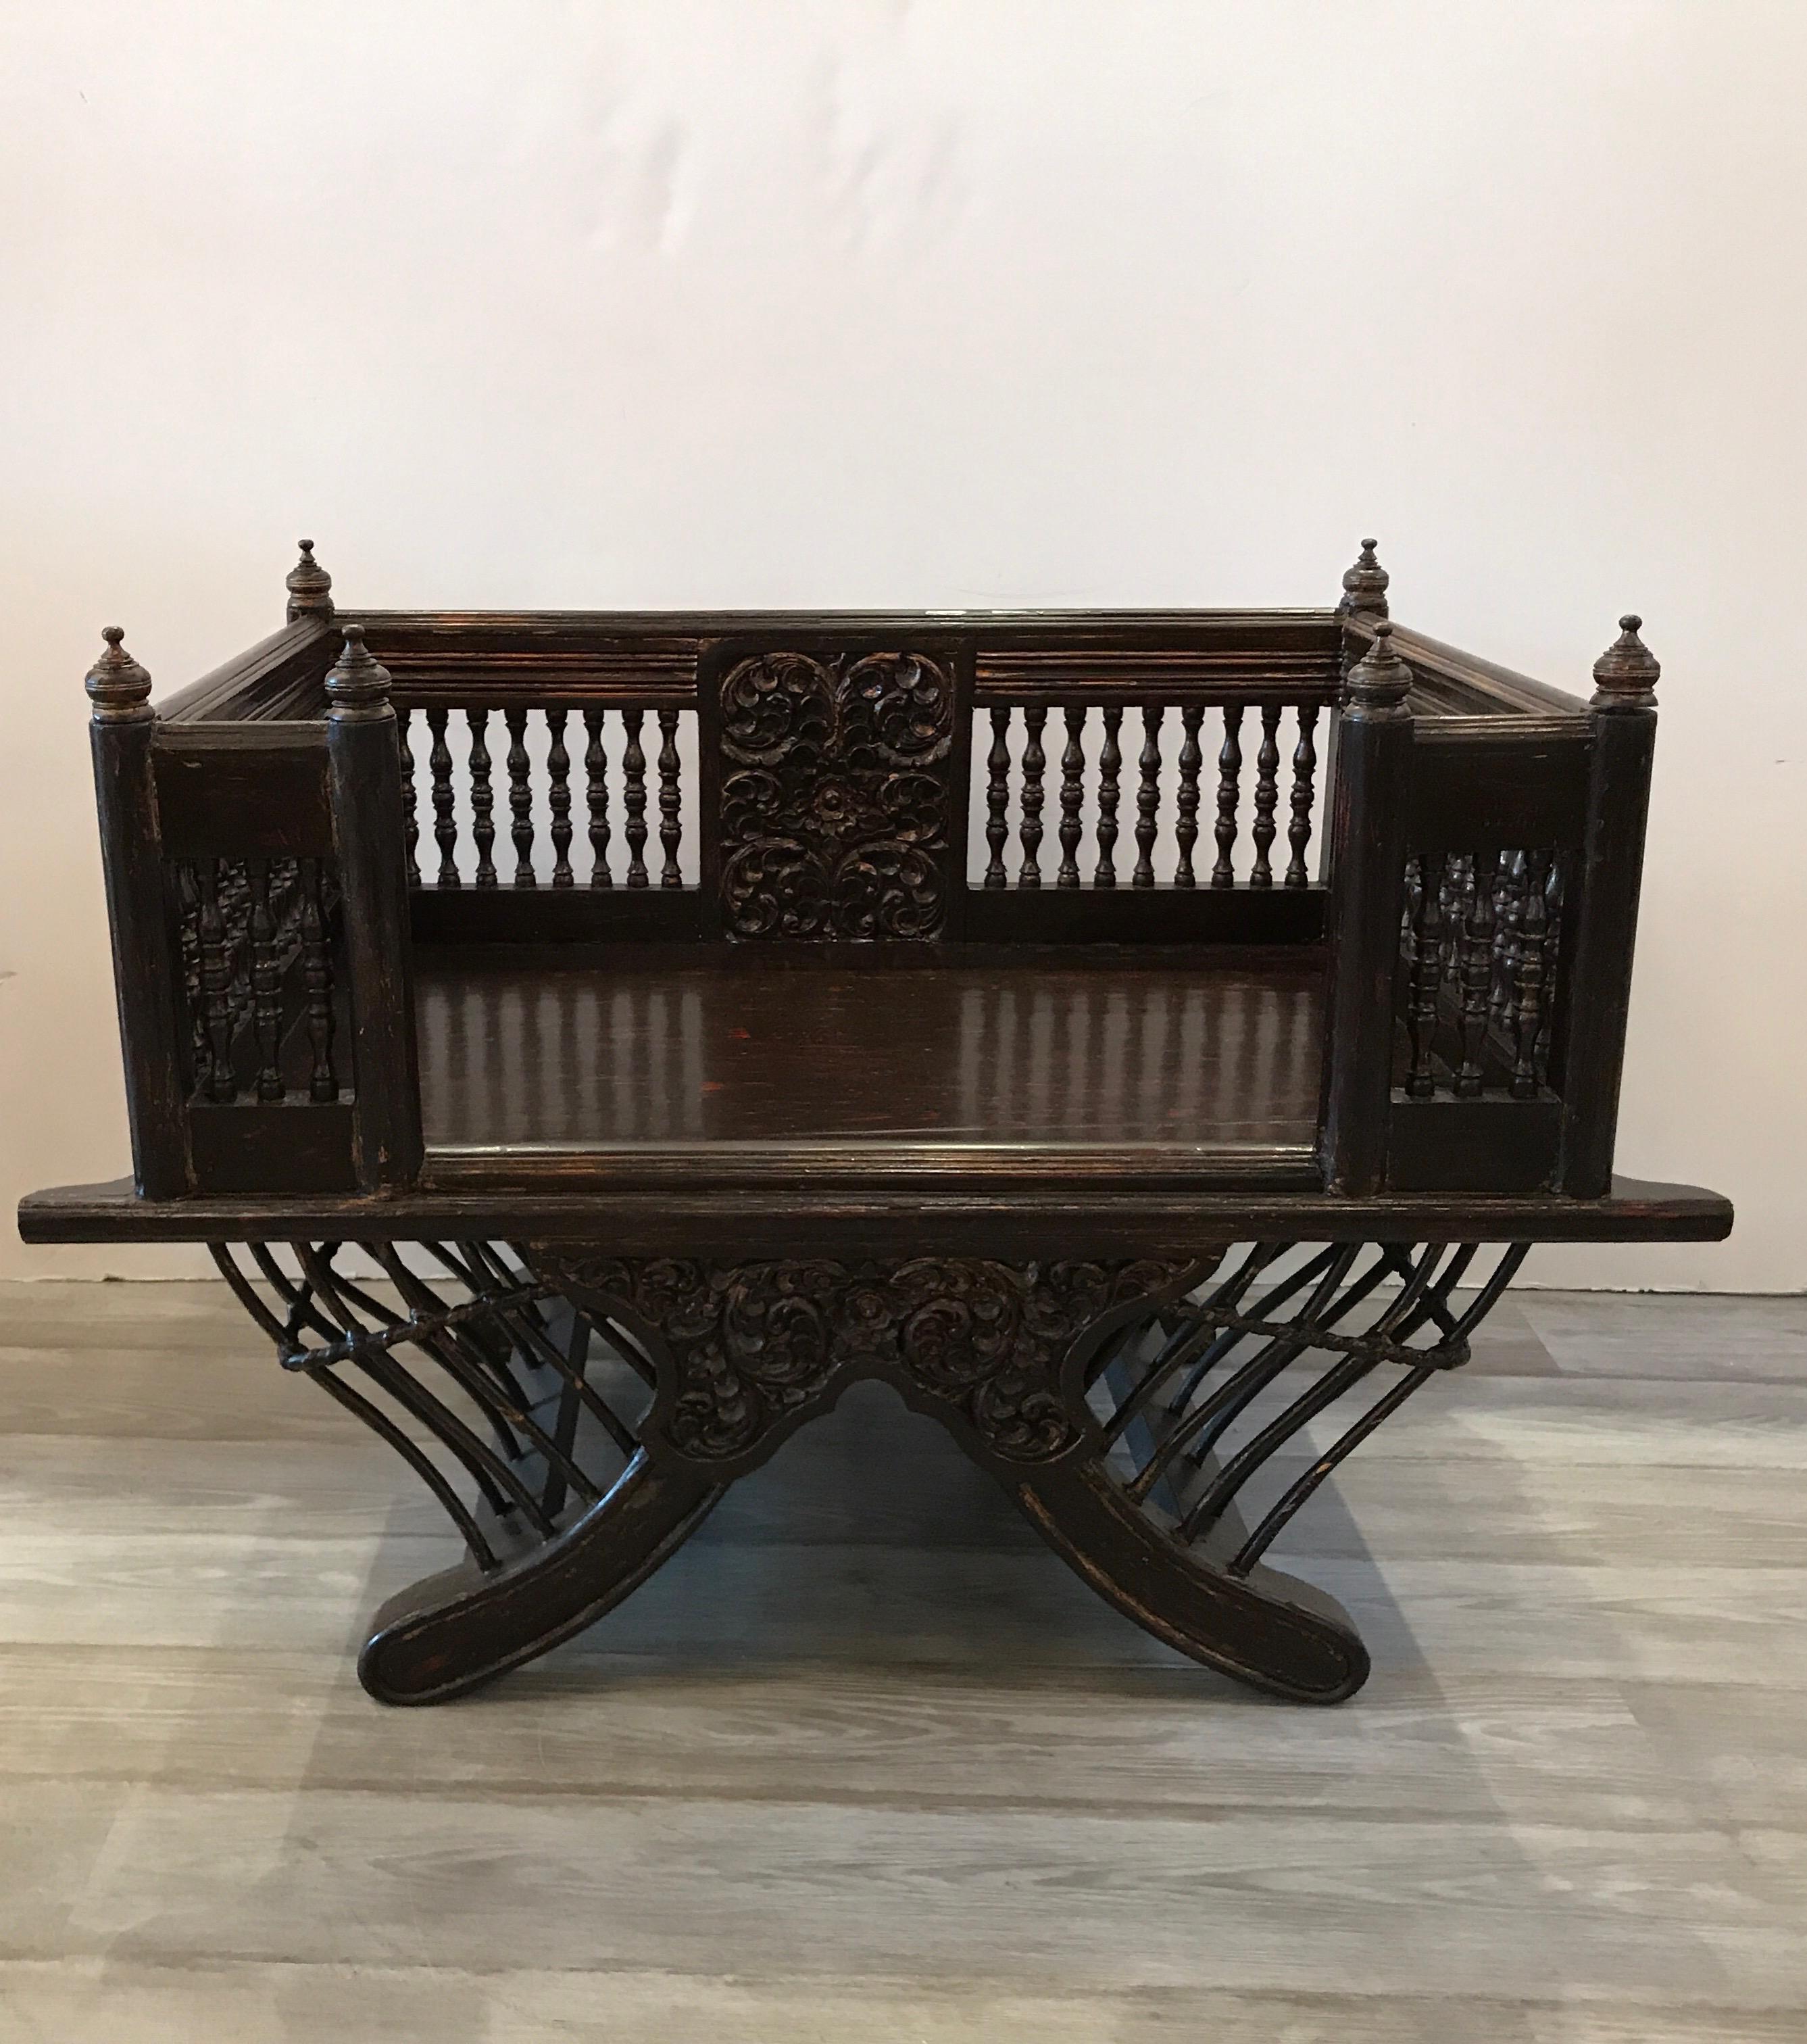 Unusual Howdah elephants seat with hand carvings. This is all original and was used to transport aristocrats and royalty. Light crazing on the finish with a few touch-ups, nothing broken.